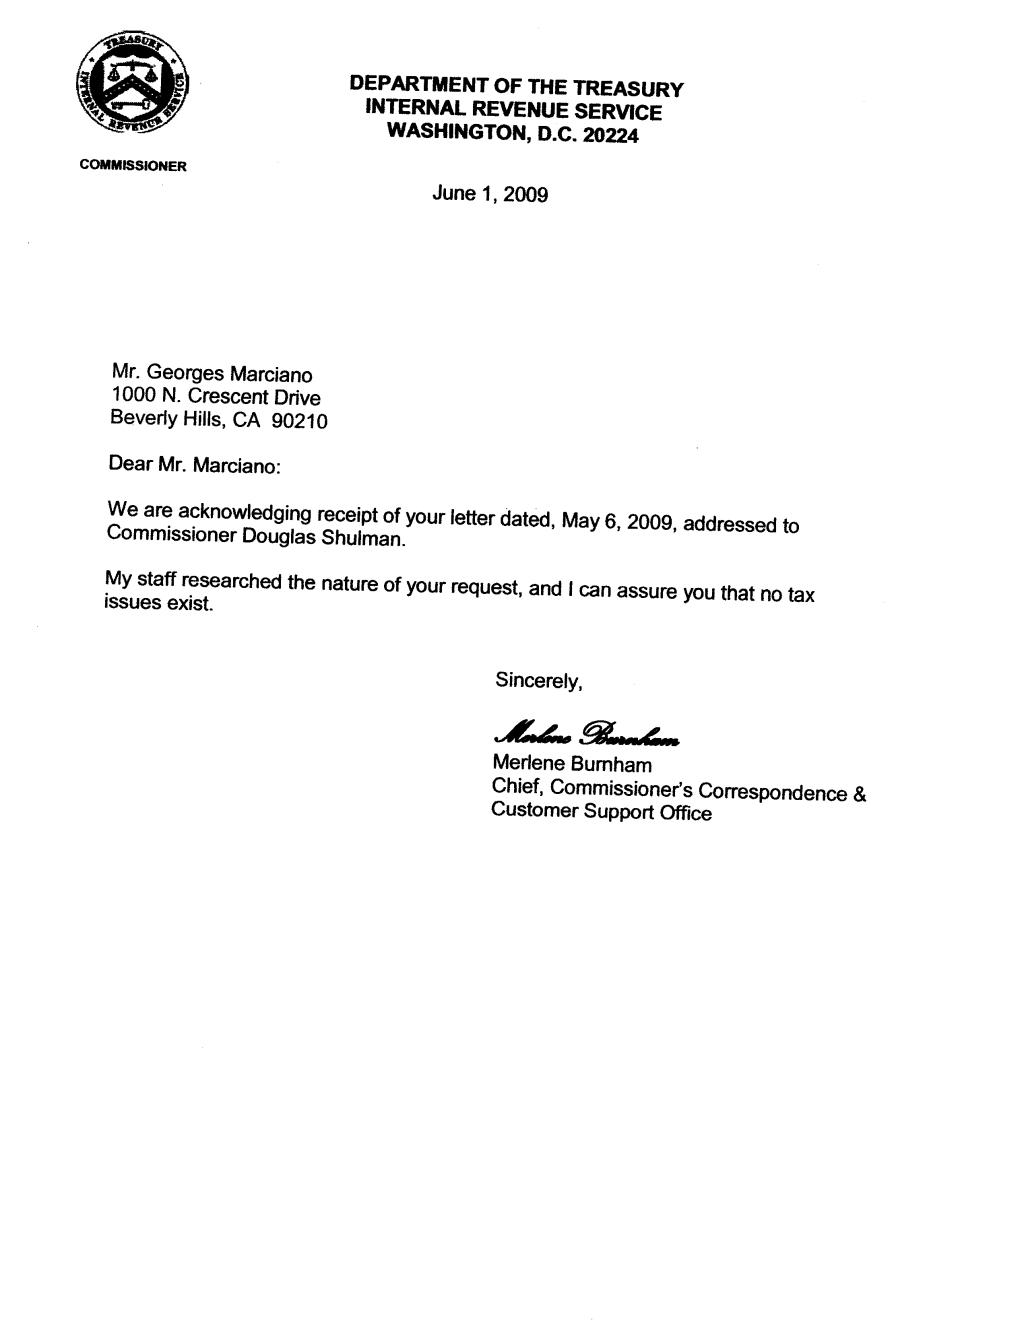 dept treas IRS letter June 1 to Georges